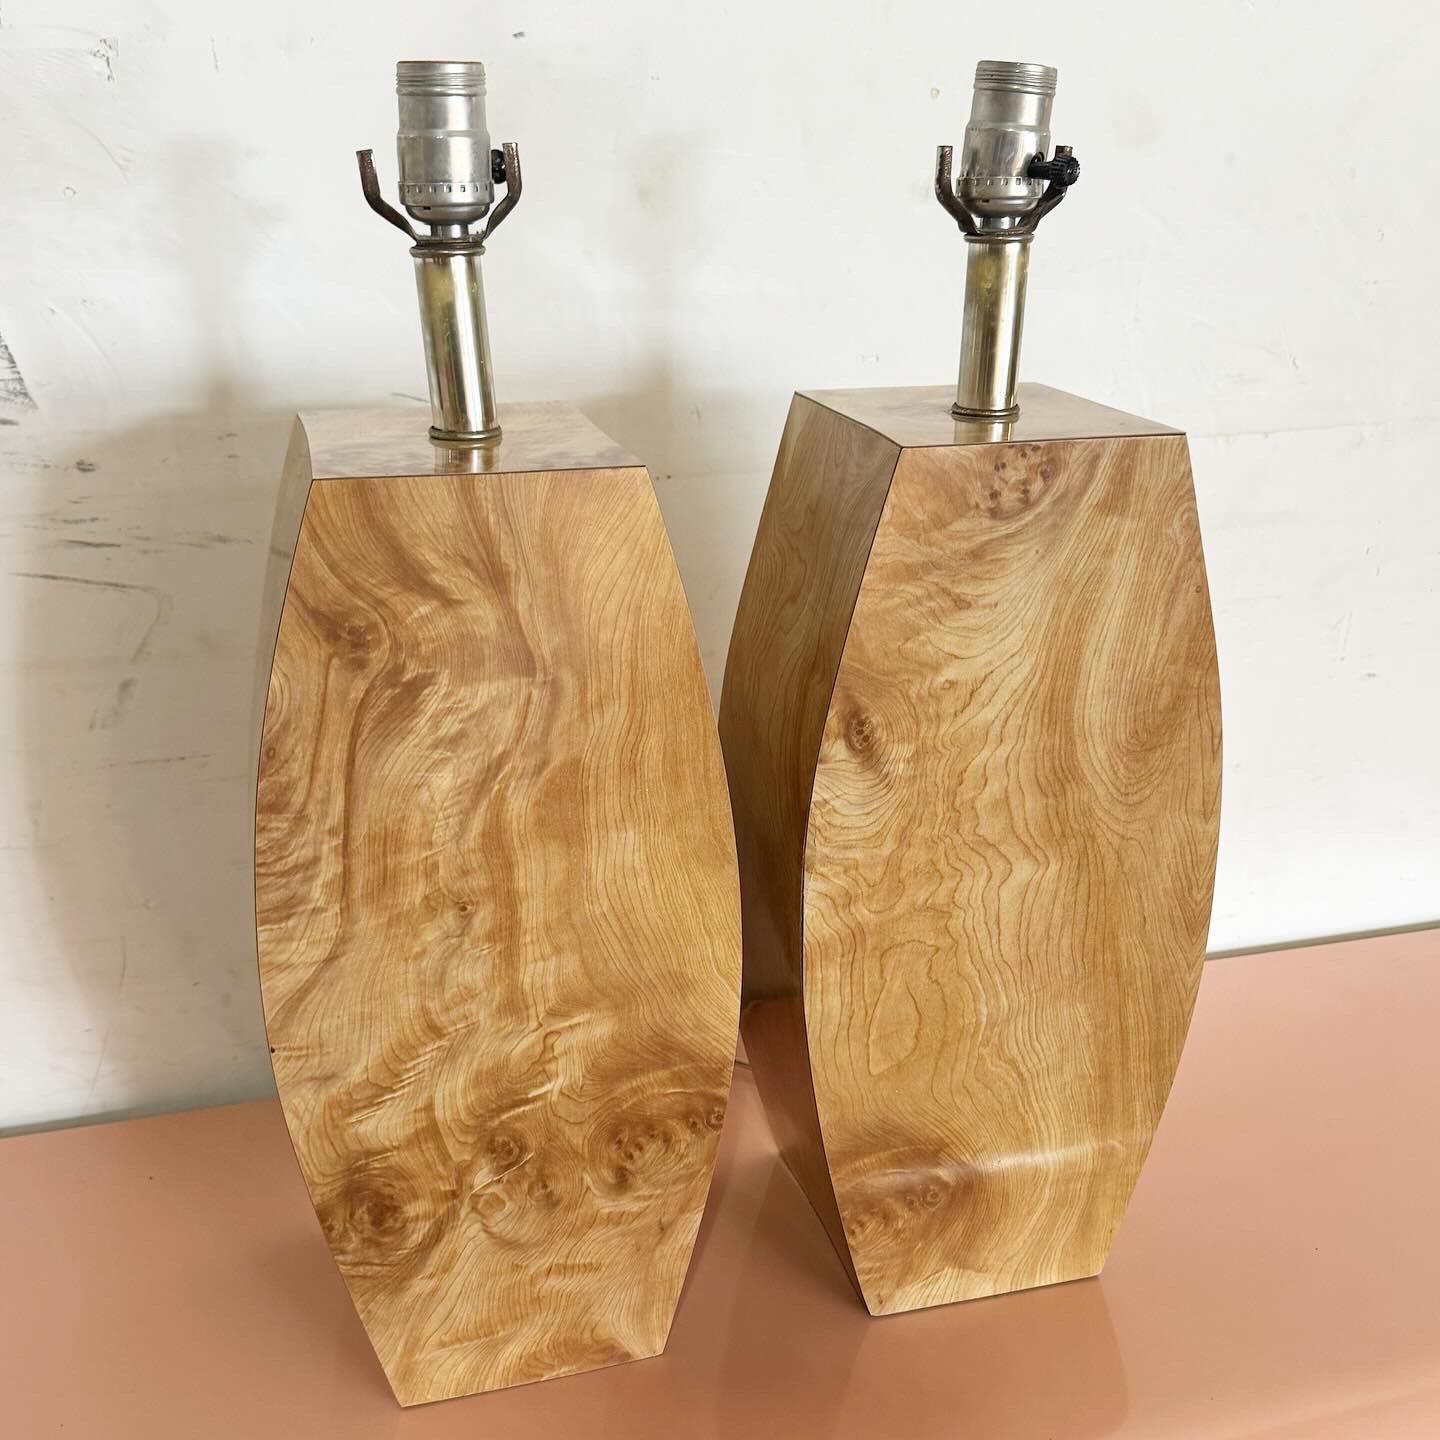 Postmodern Burl Wood Laminate Table Lamps - a Pair For Sale 1